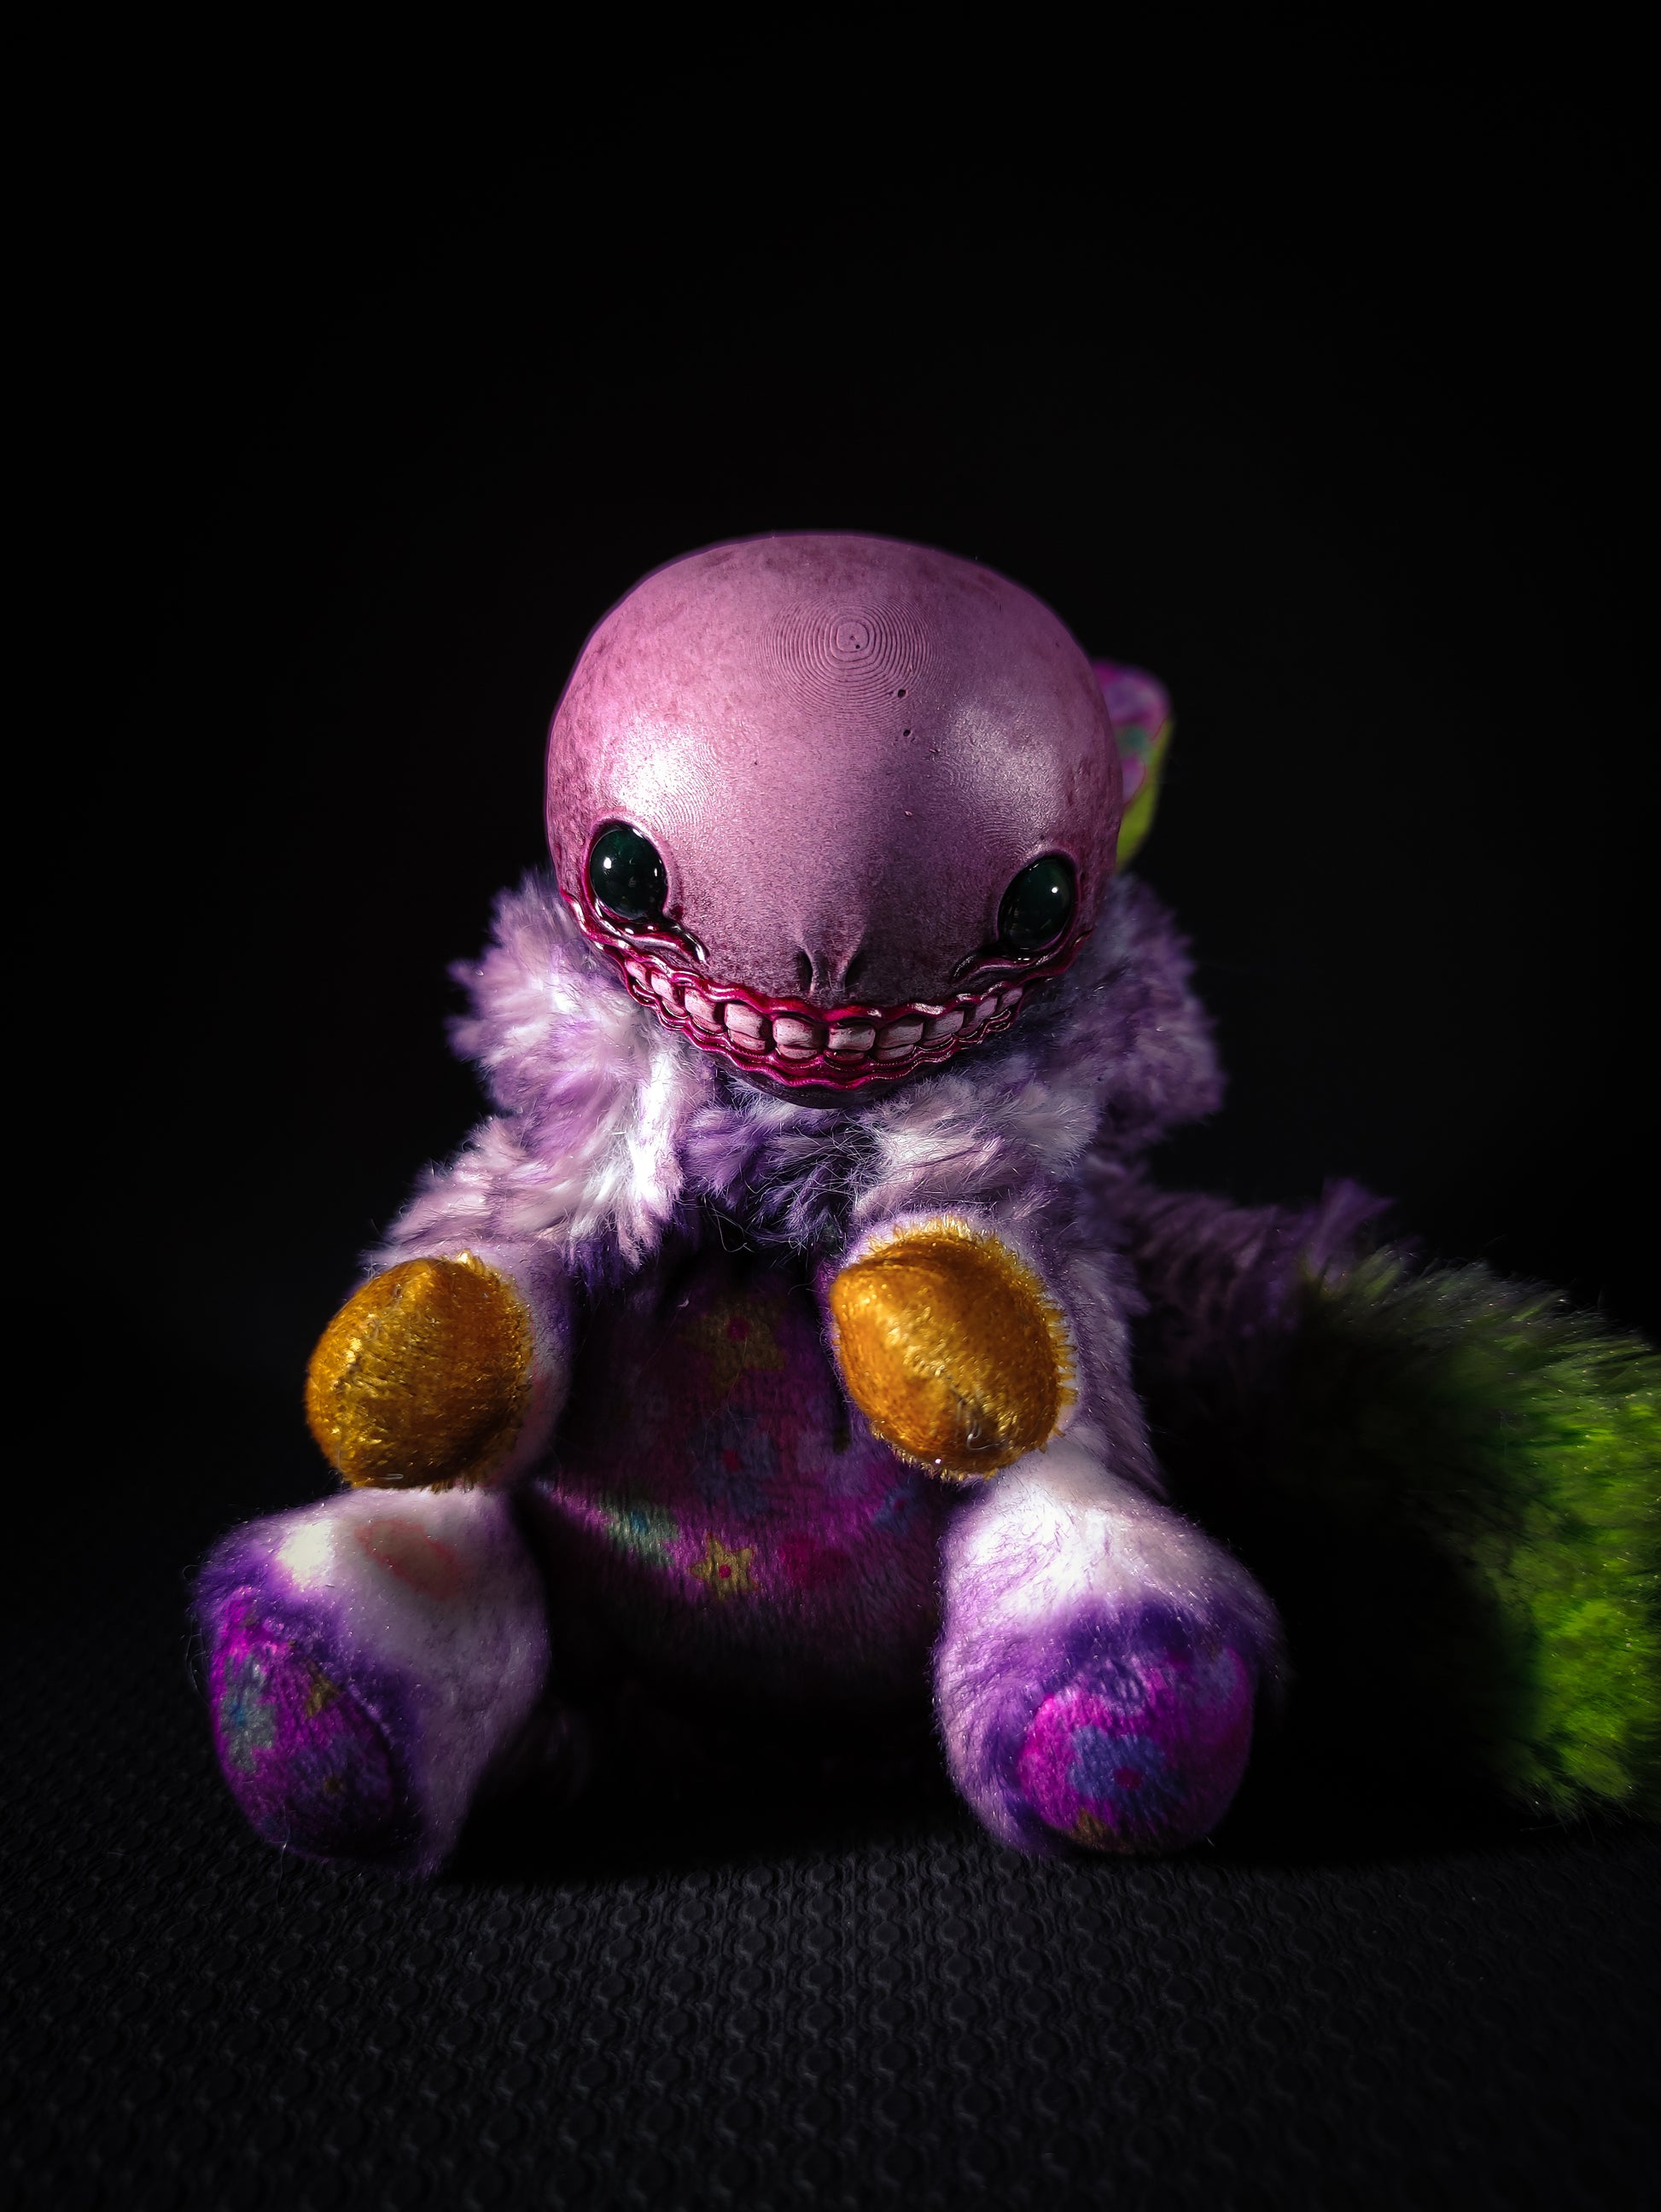 FRIEND Neon Infection Flavour - Cryptid Art Doll Plush Toy